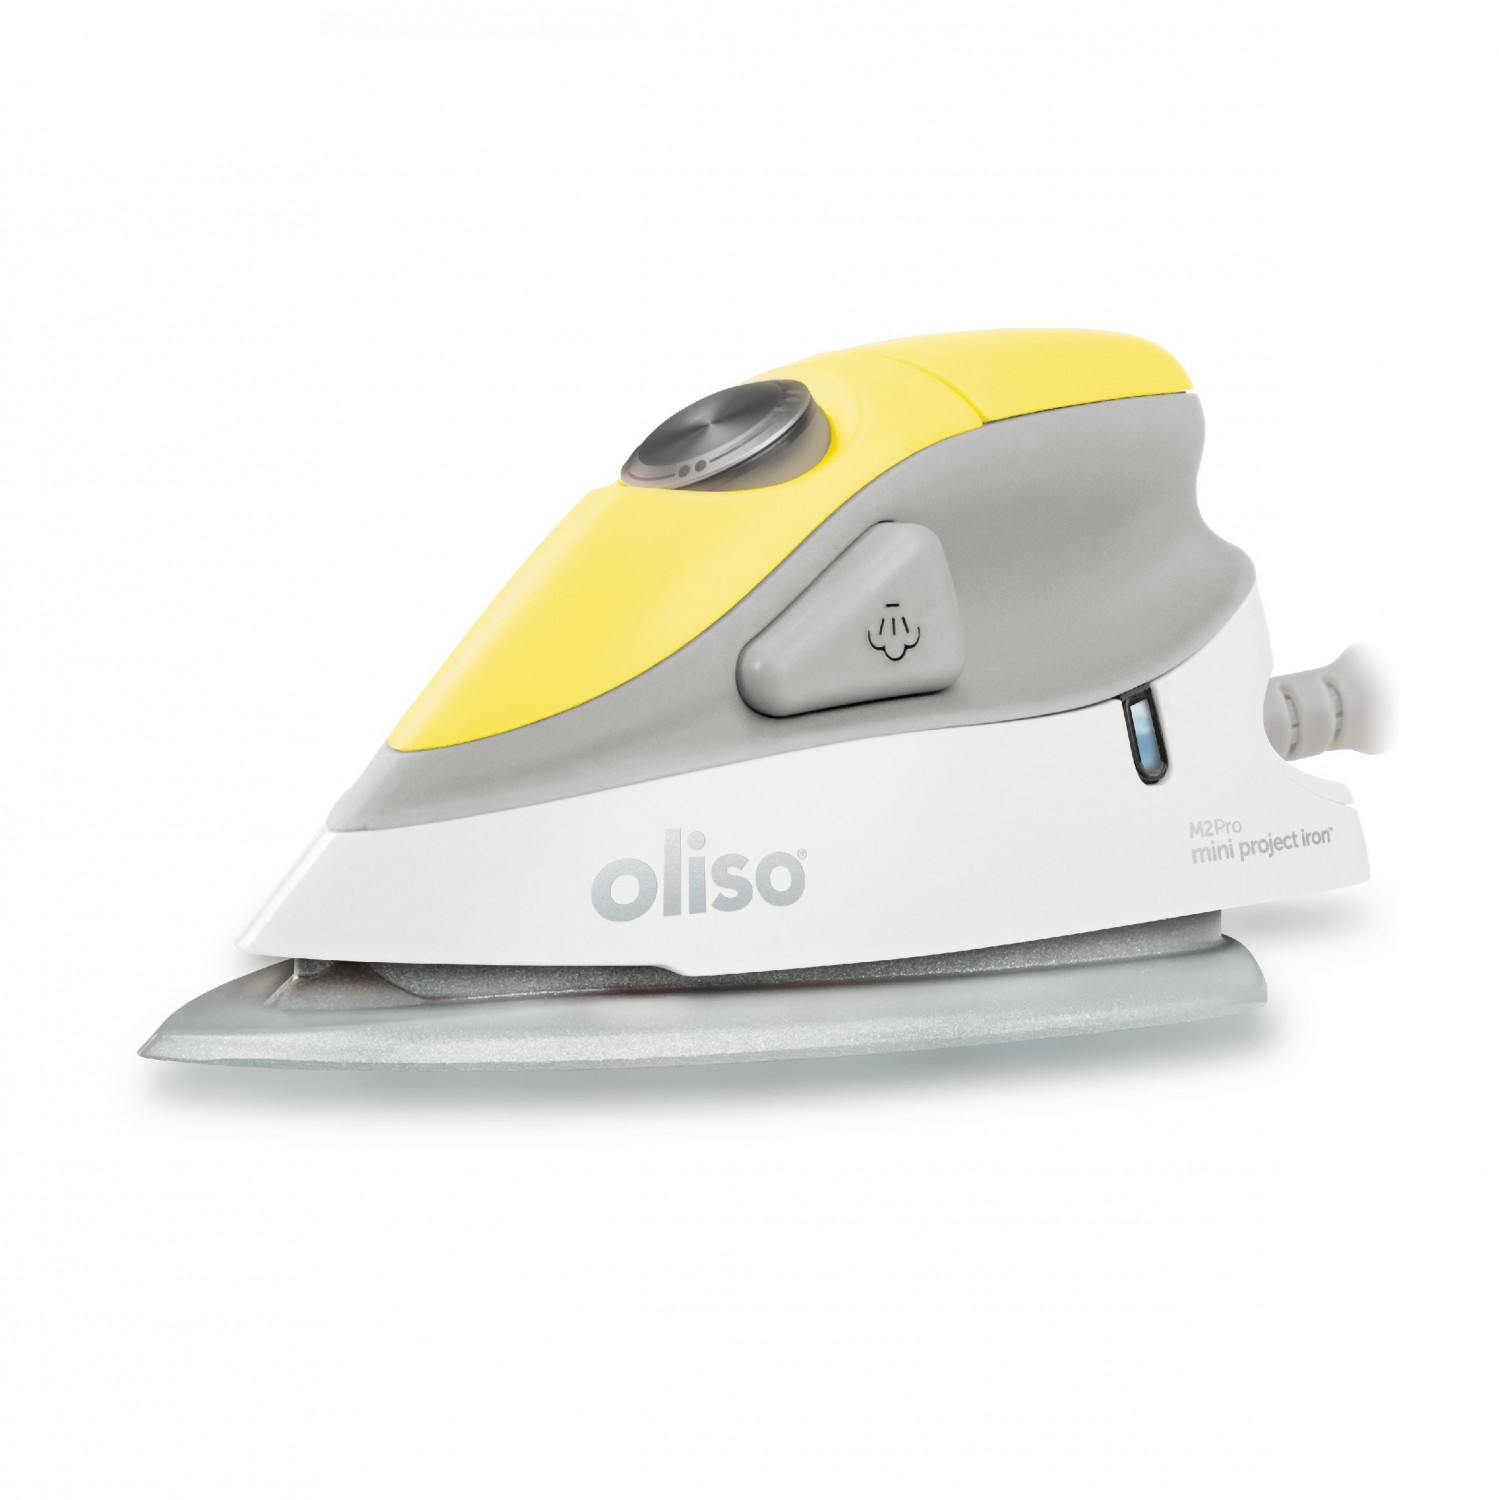 Auto-Lift Iron For Quilters - Get The Safest Iron From Oliso – oliso